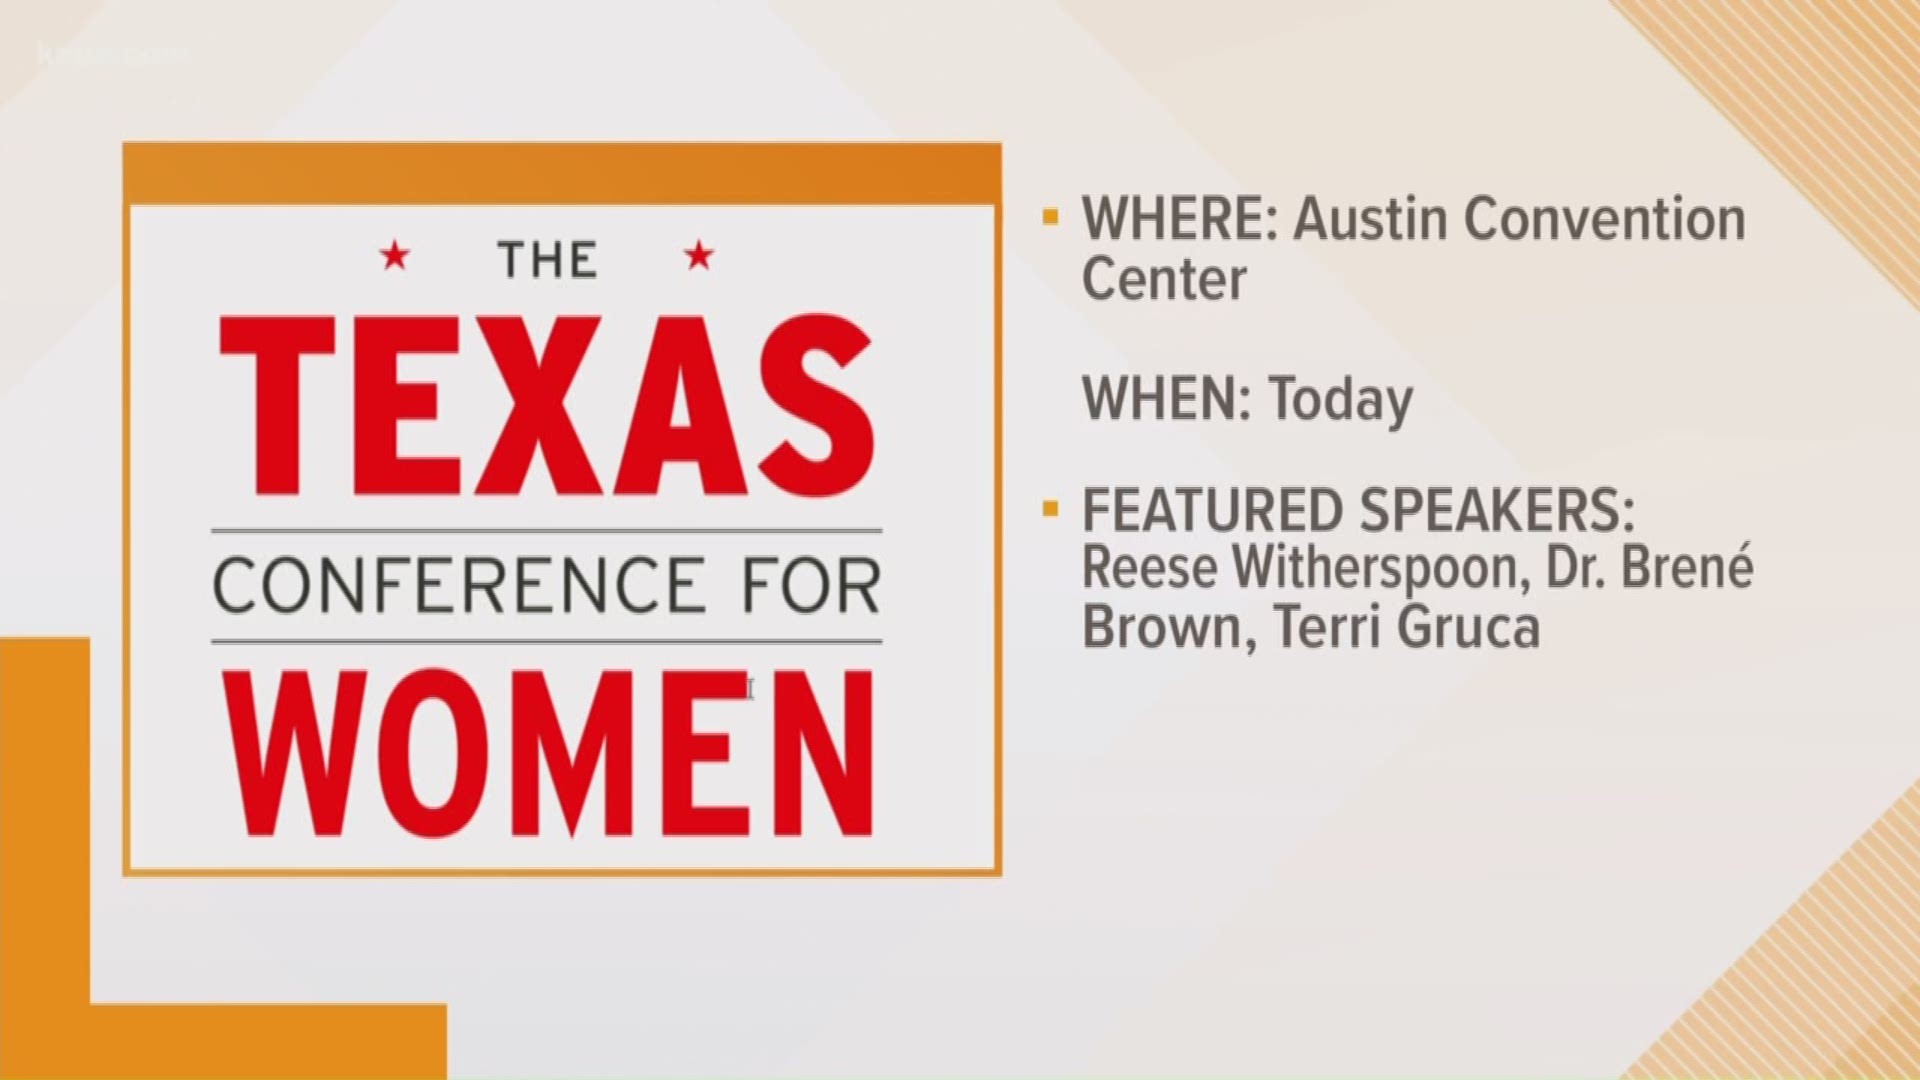 More than 7,000 women are gathering in Austin Friday for the 19th annual Texas conference for women.